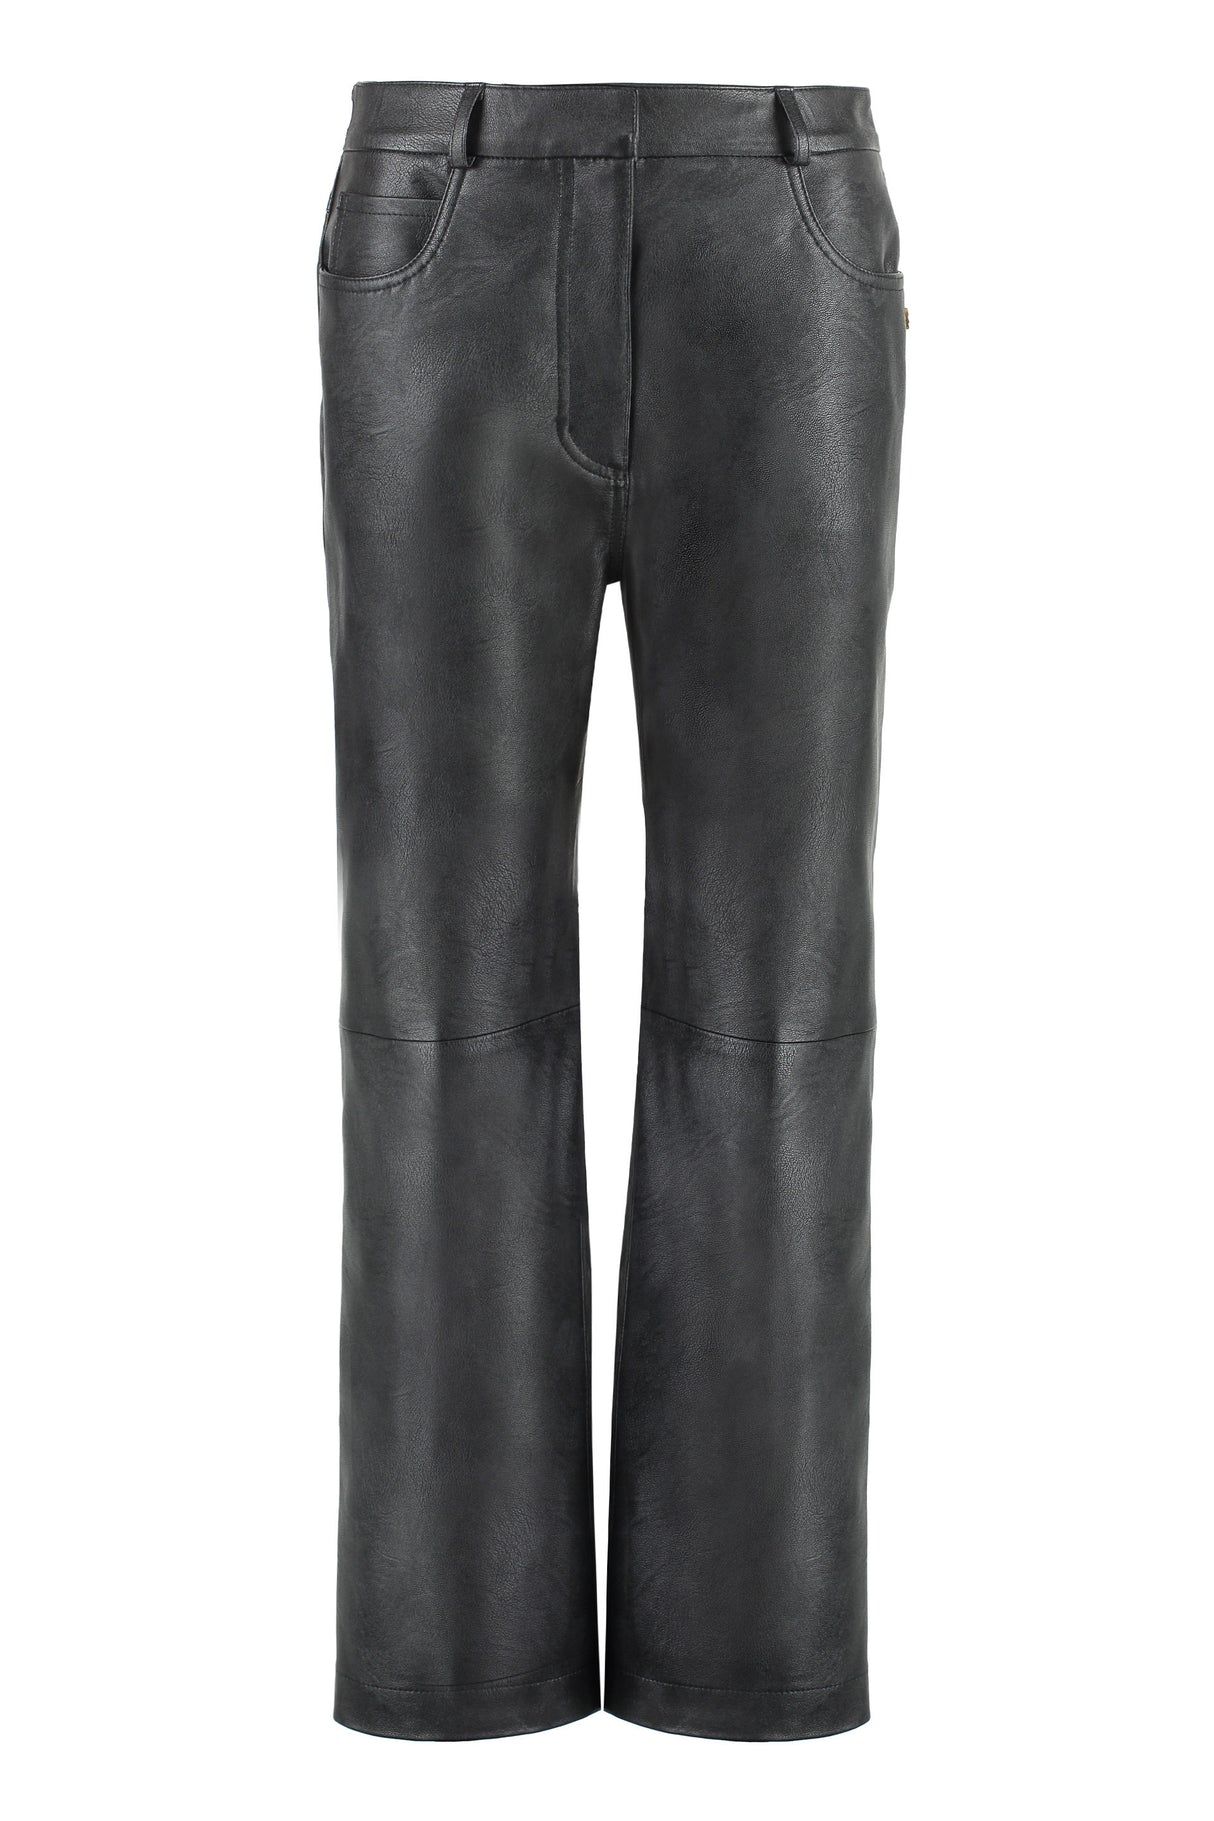 STELLA MCCARTNEY Black Alter Mat Faux Leather Trousers for Women